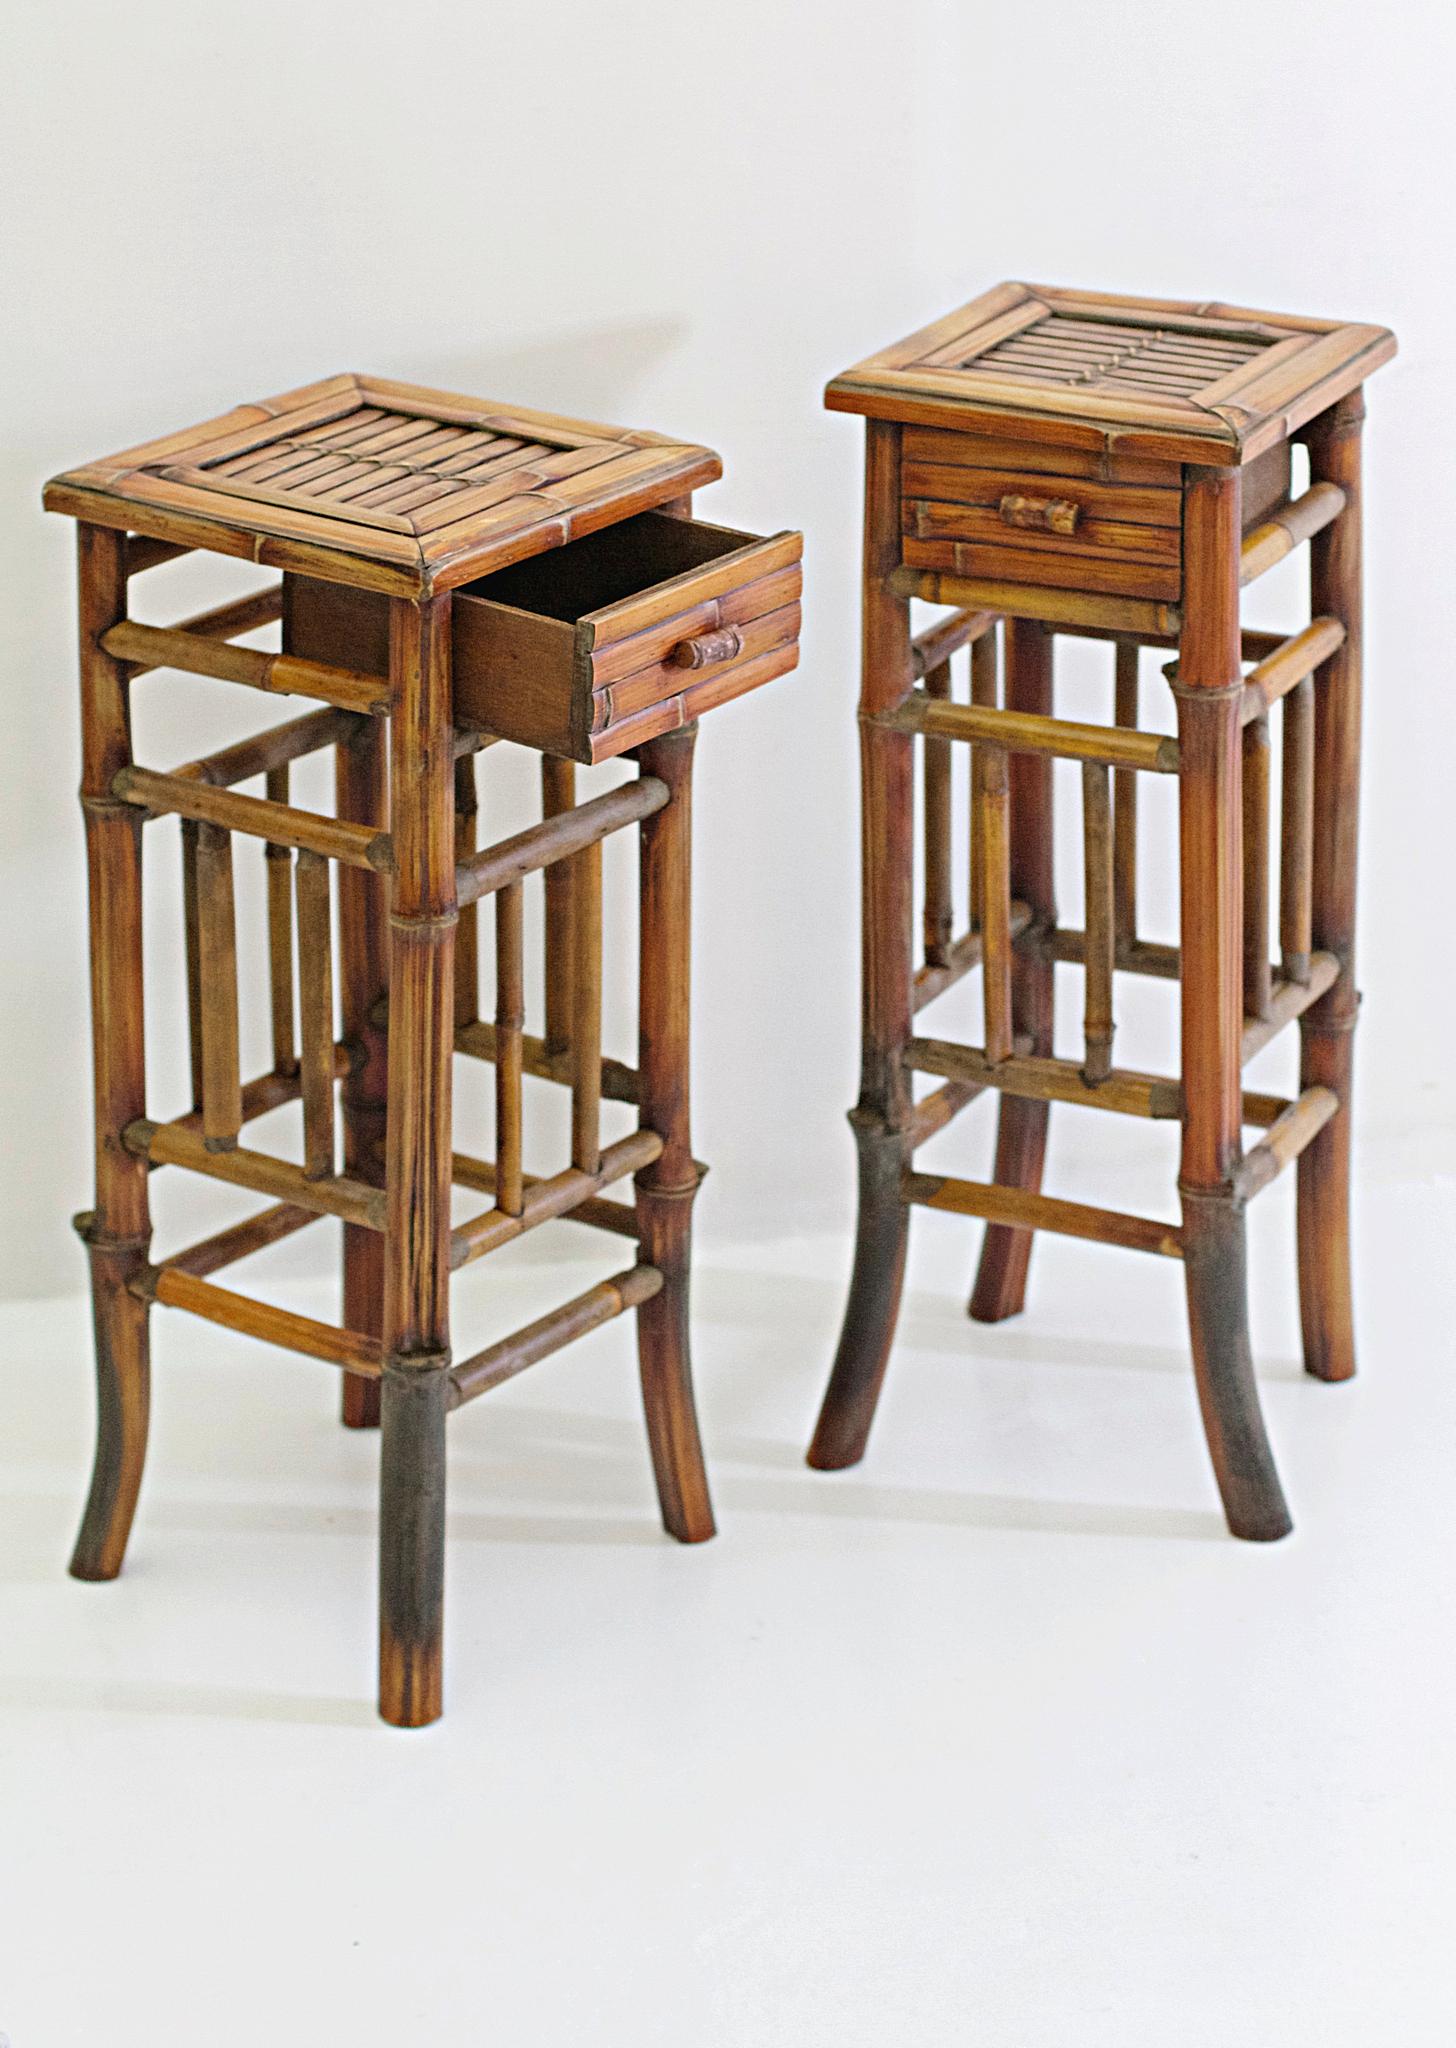 A pair of handmade elegant and sleek nightstands in bamboo. Each has one-drawer at the top.